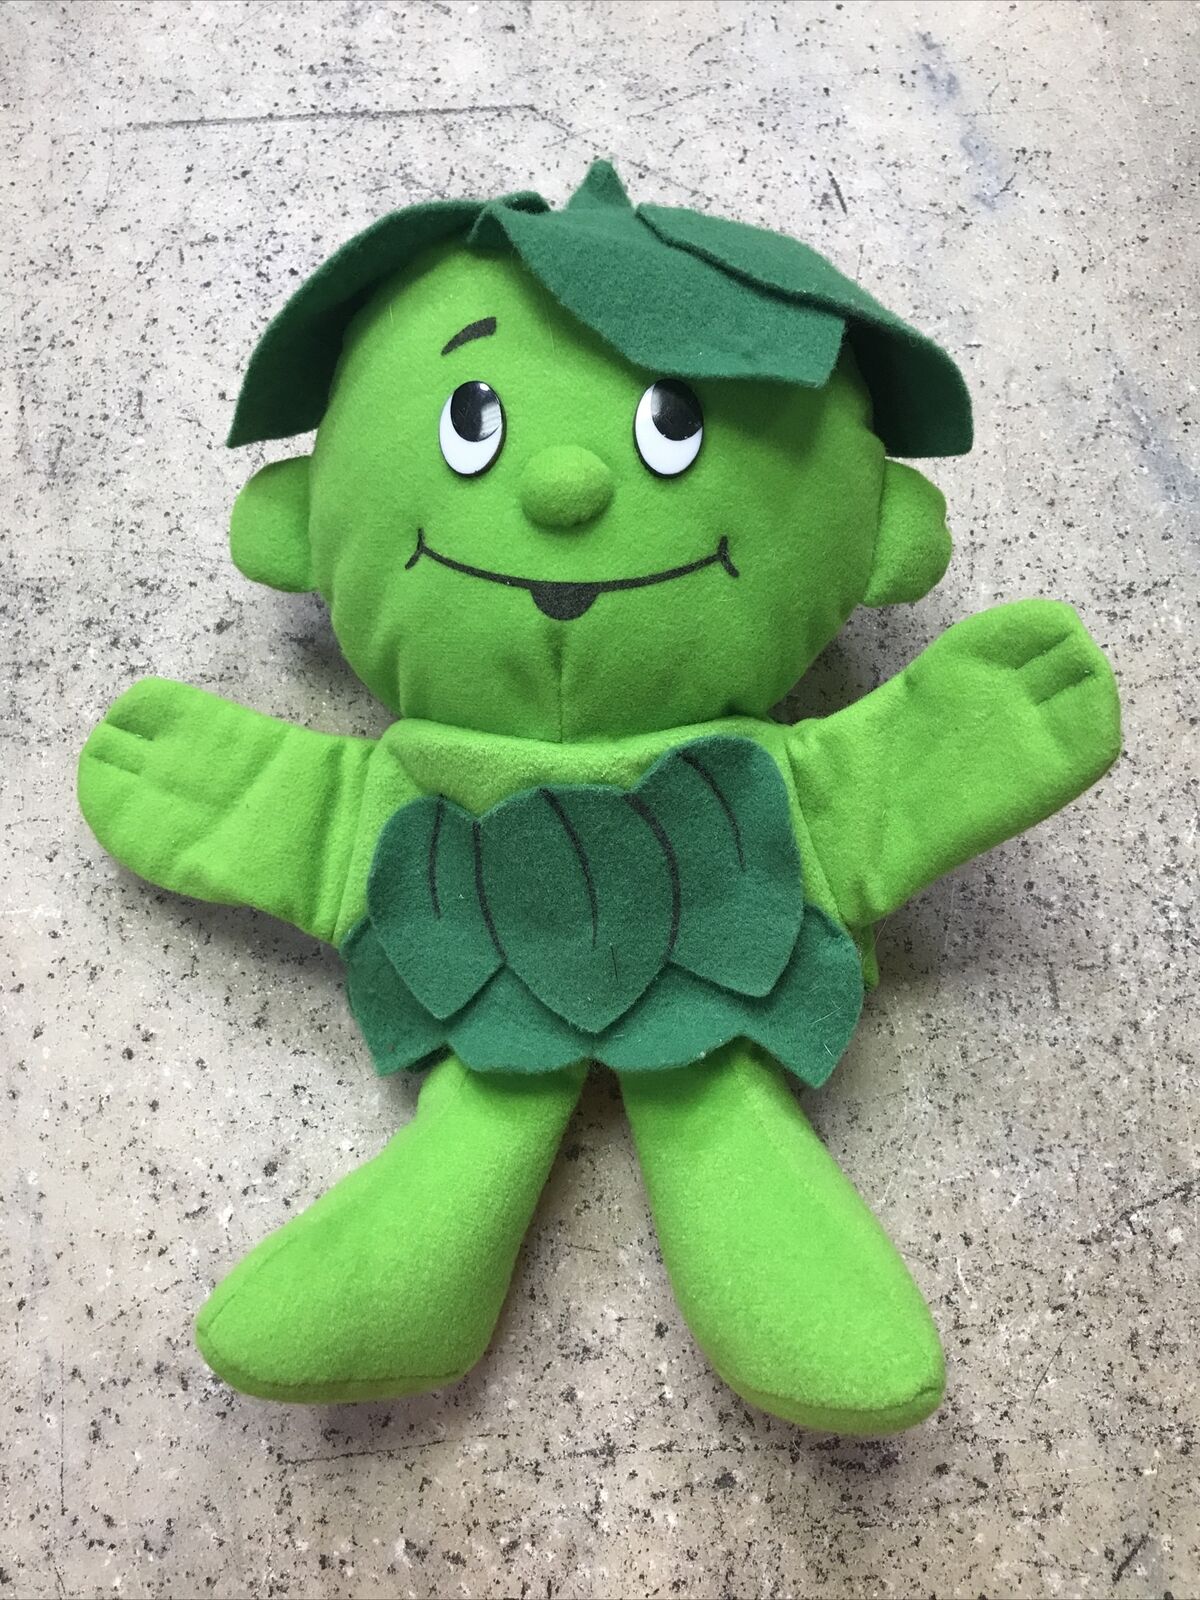 Vintage Green Giant Little Sprout Hand Puppet Plush Toy Order 1992 Fast Ship